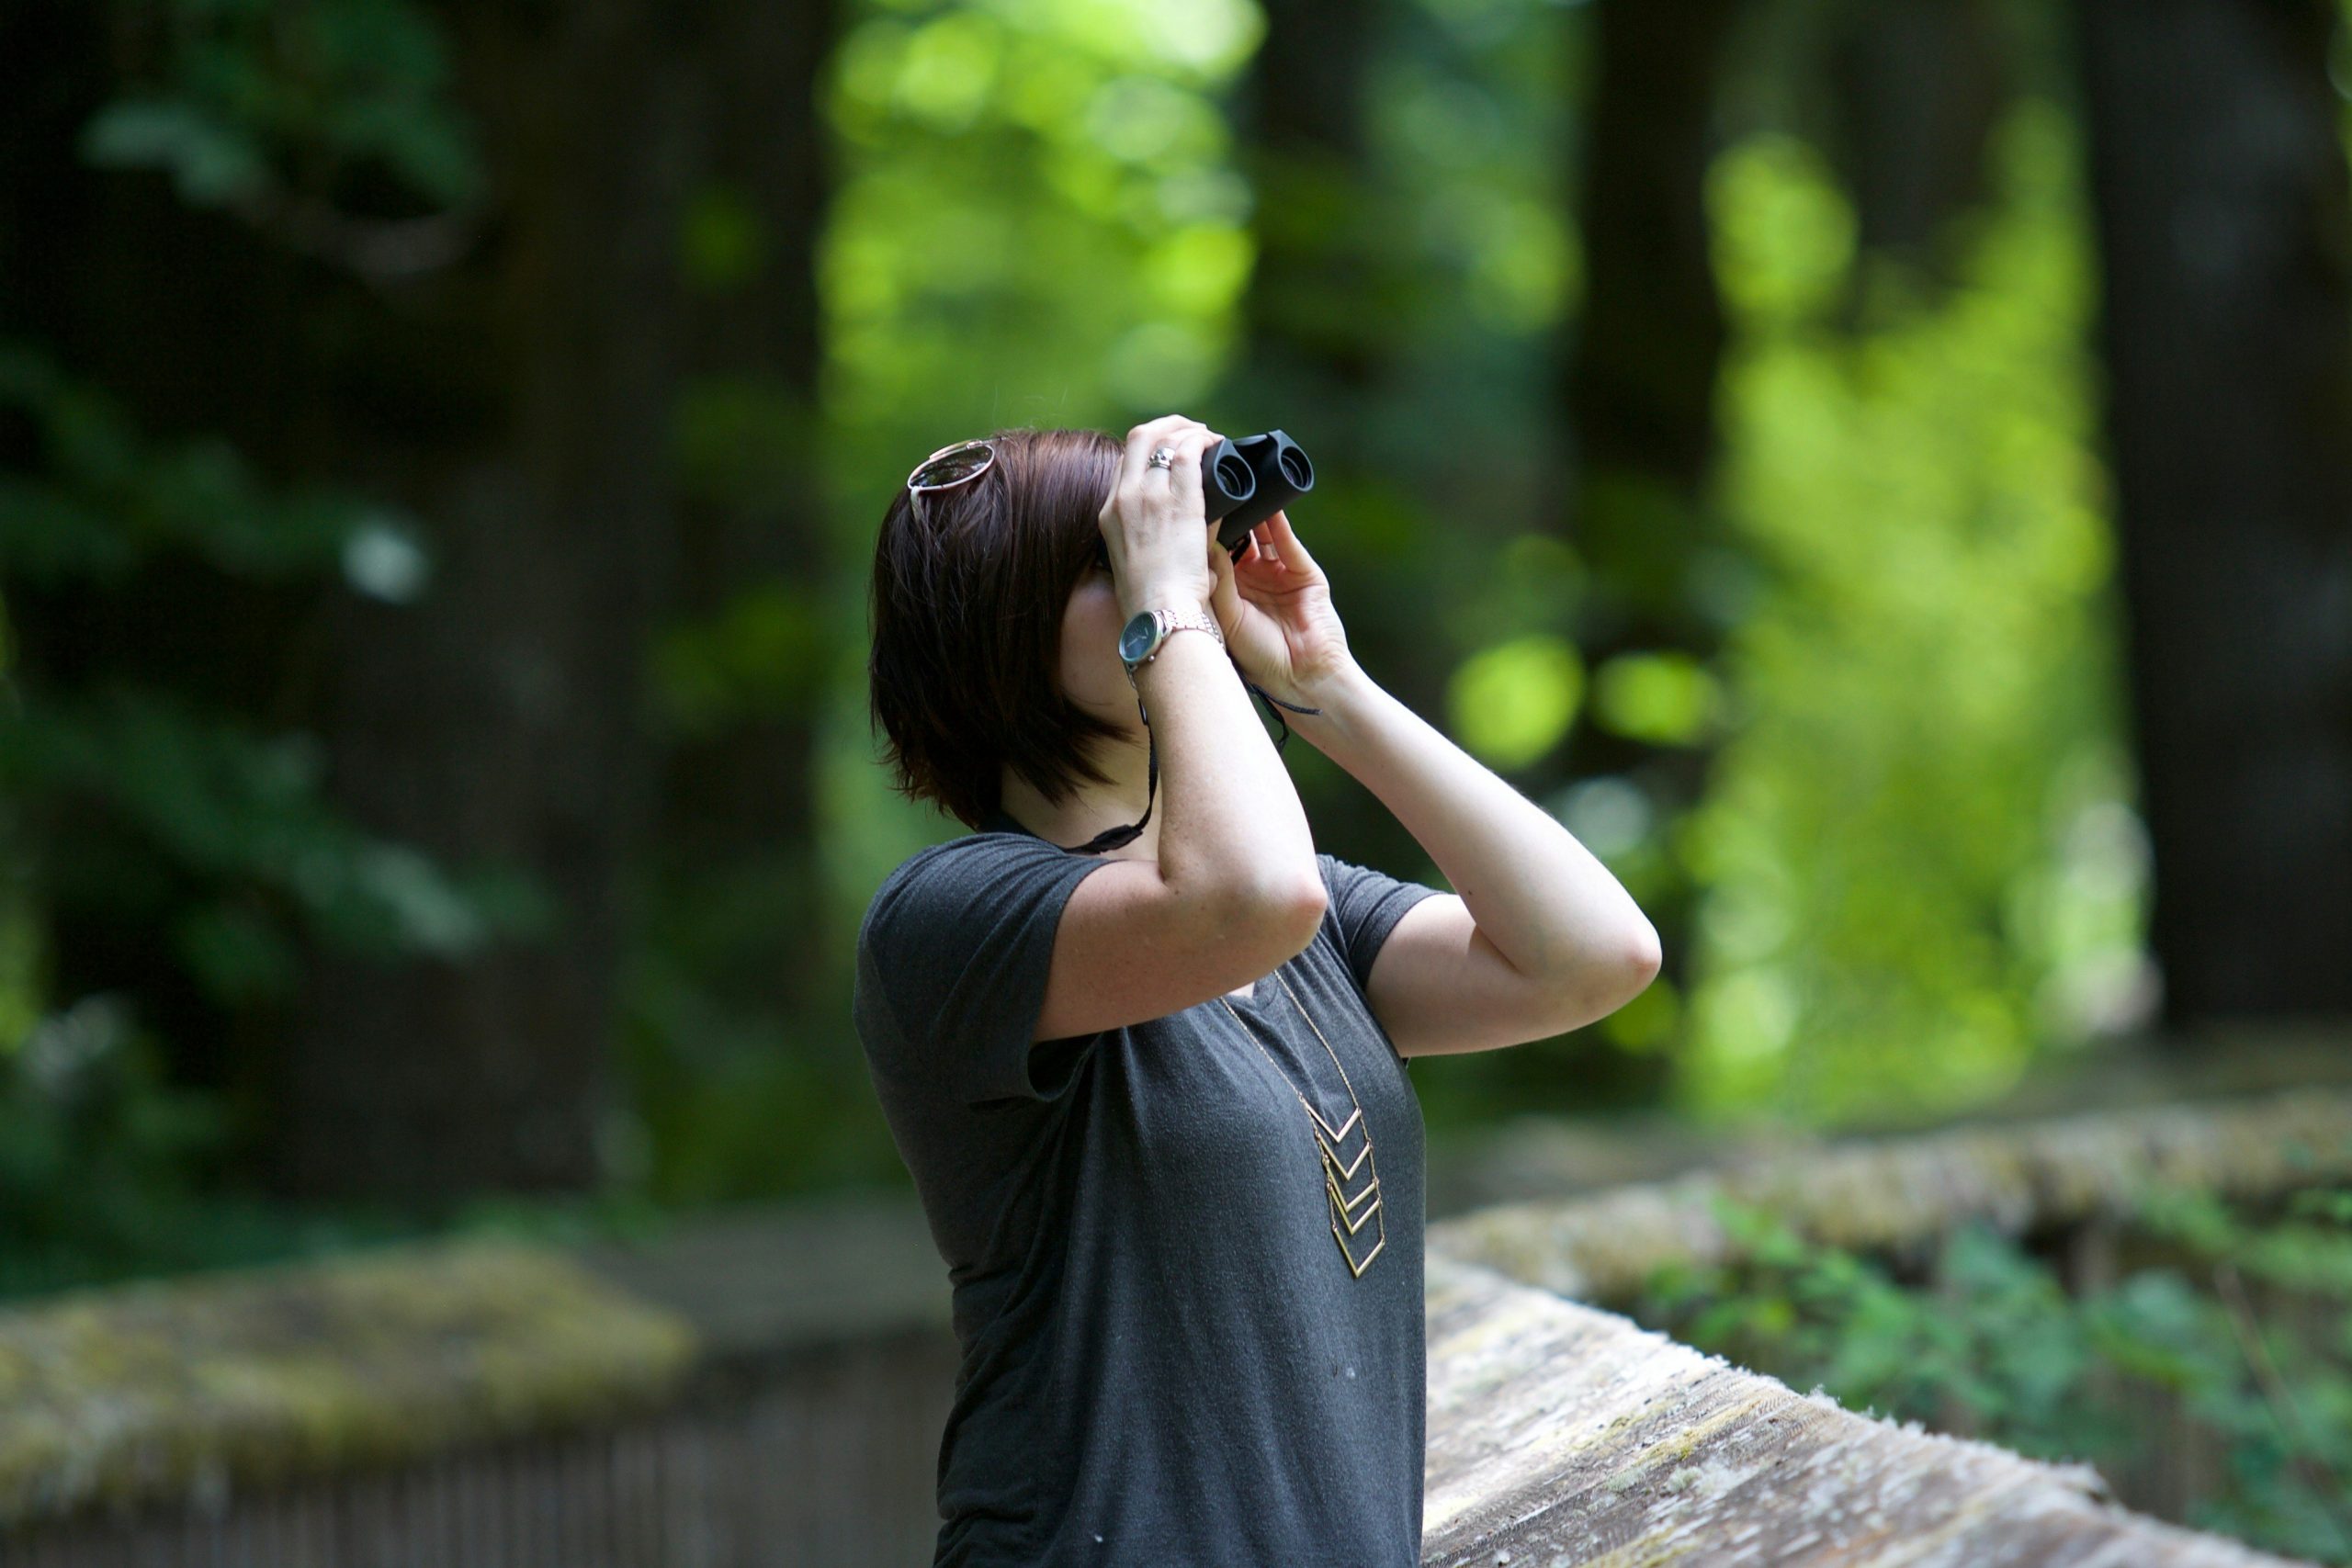 discover the joy of bird watching with our informative guides and helpful tips for spotting and identifying a wide variety of birds in their natural habitats.